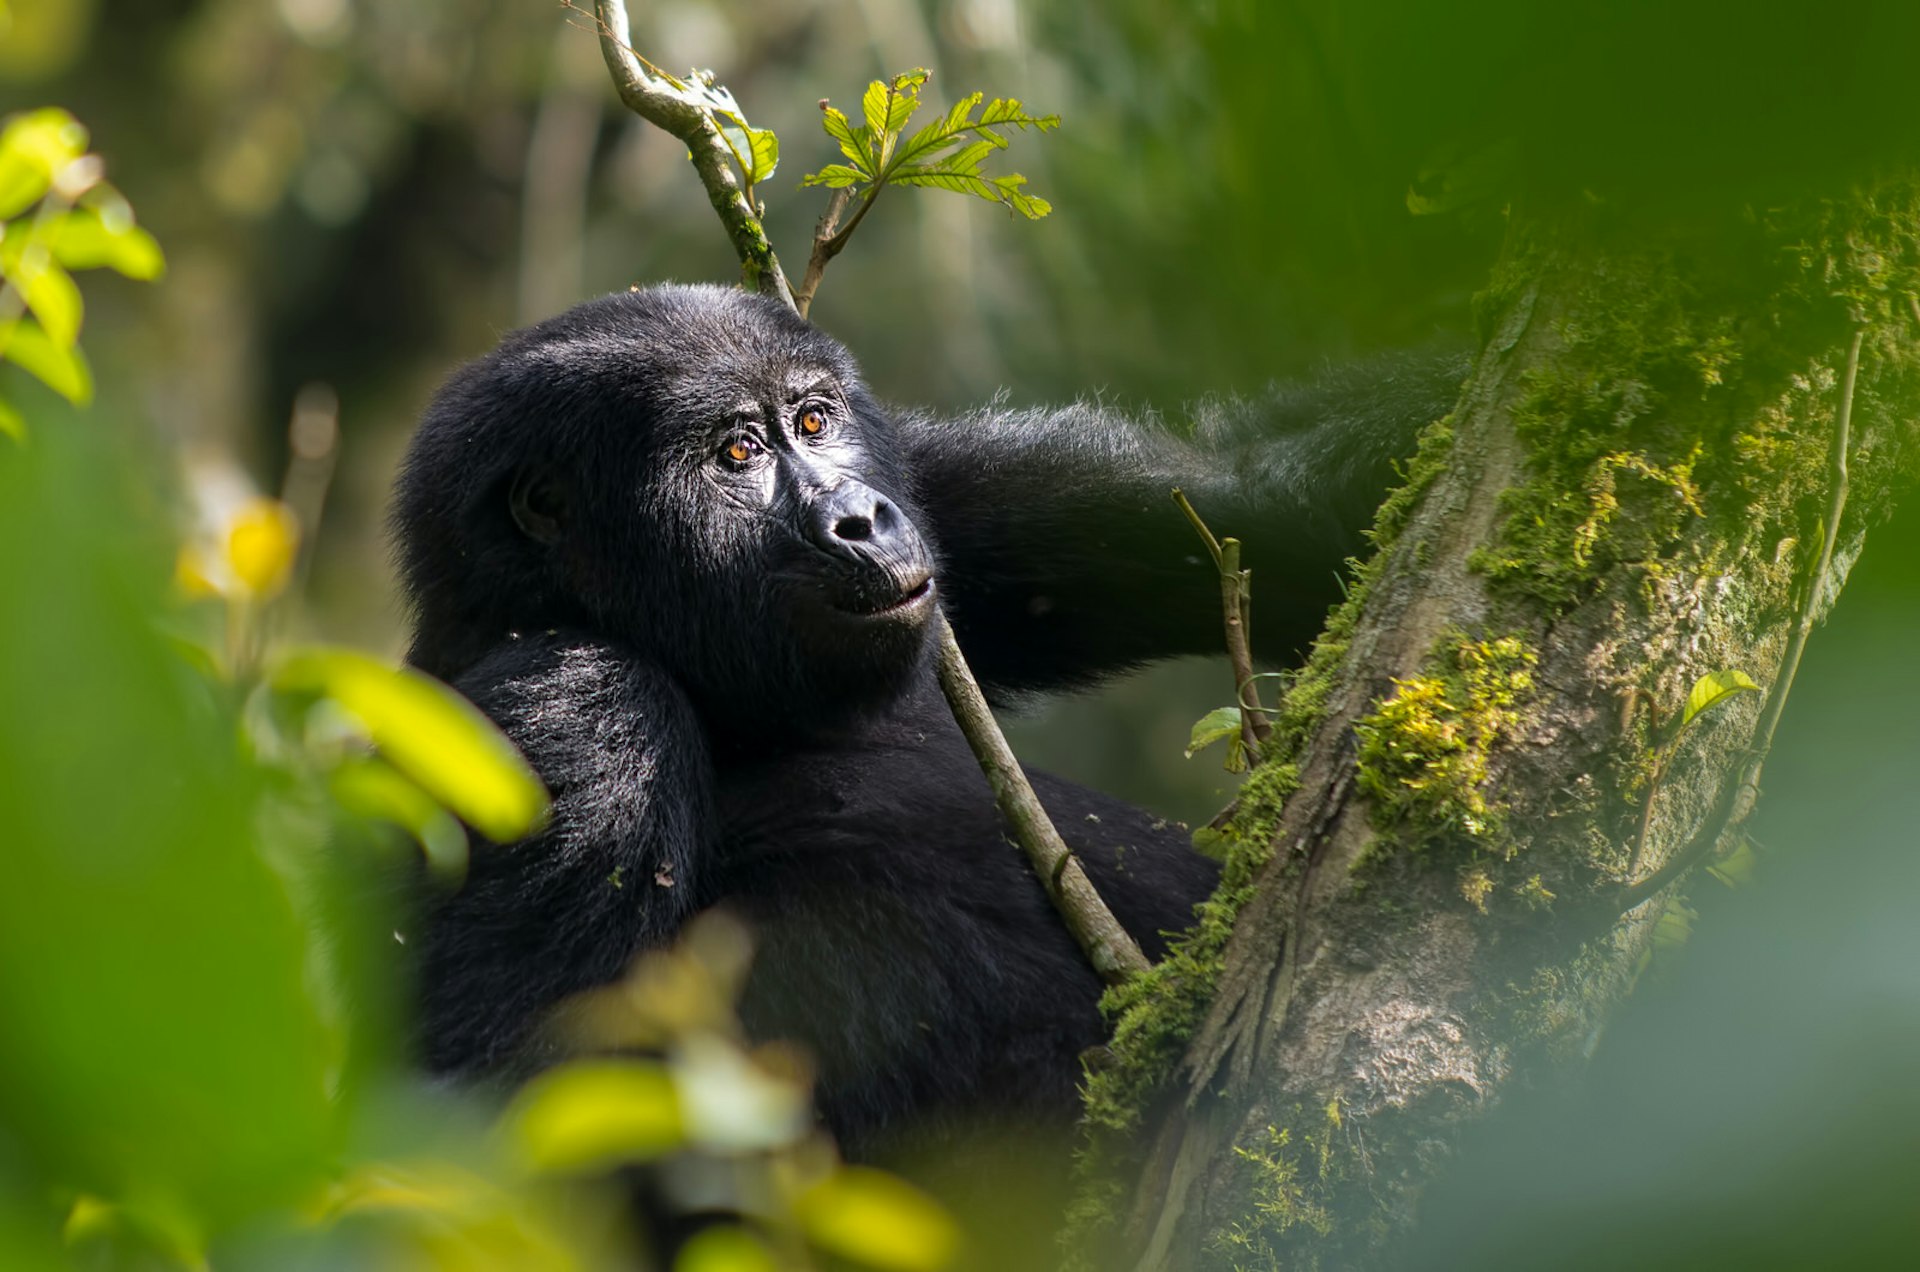 A young mountain gorilla perched in a tree in Uganda © Eric Reitsma / 500px